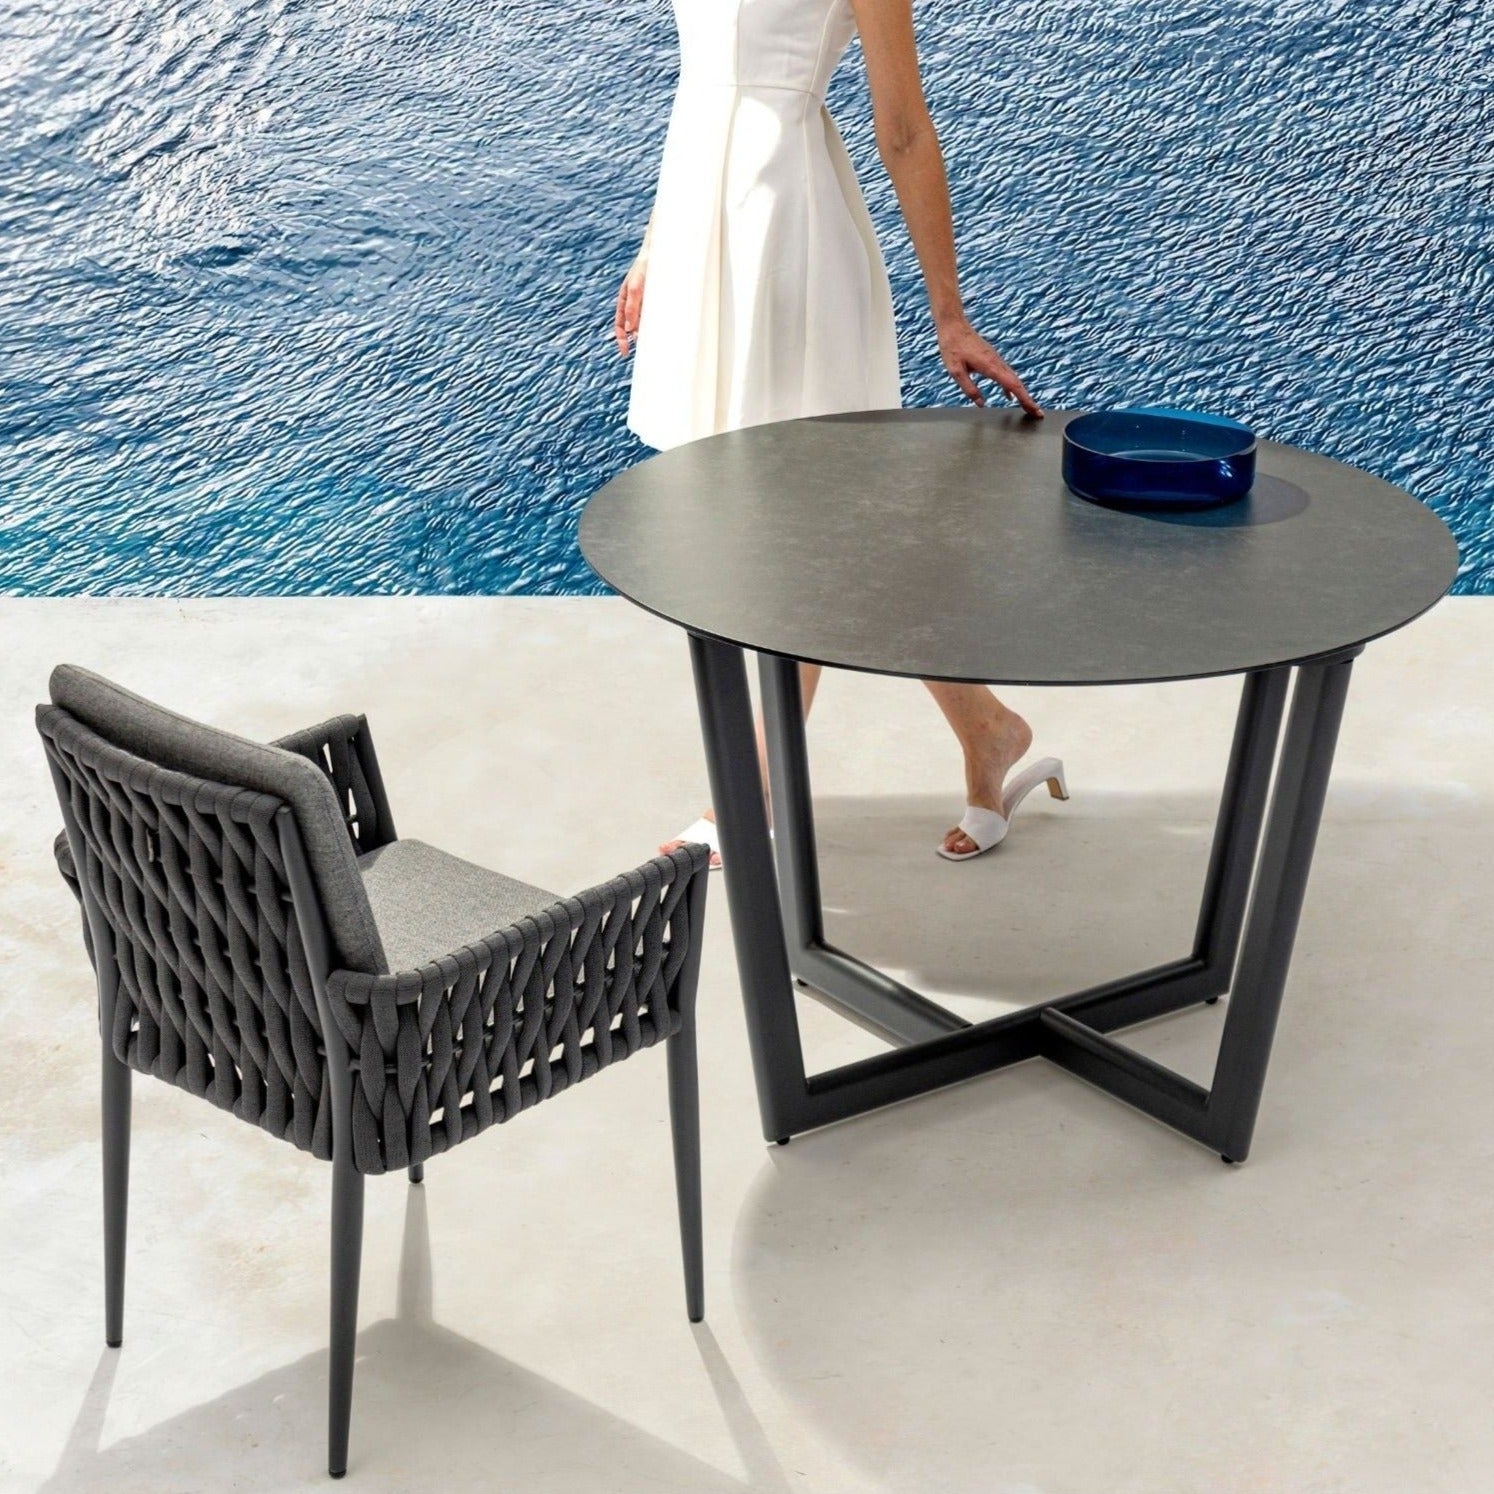 Hug Series | Outdoor Dining Chair - The Feelter